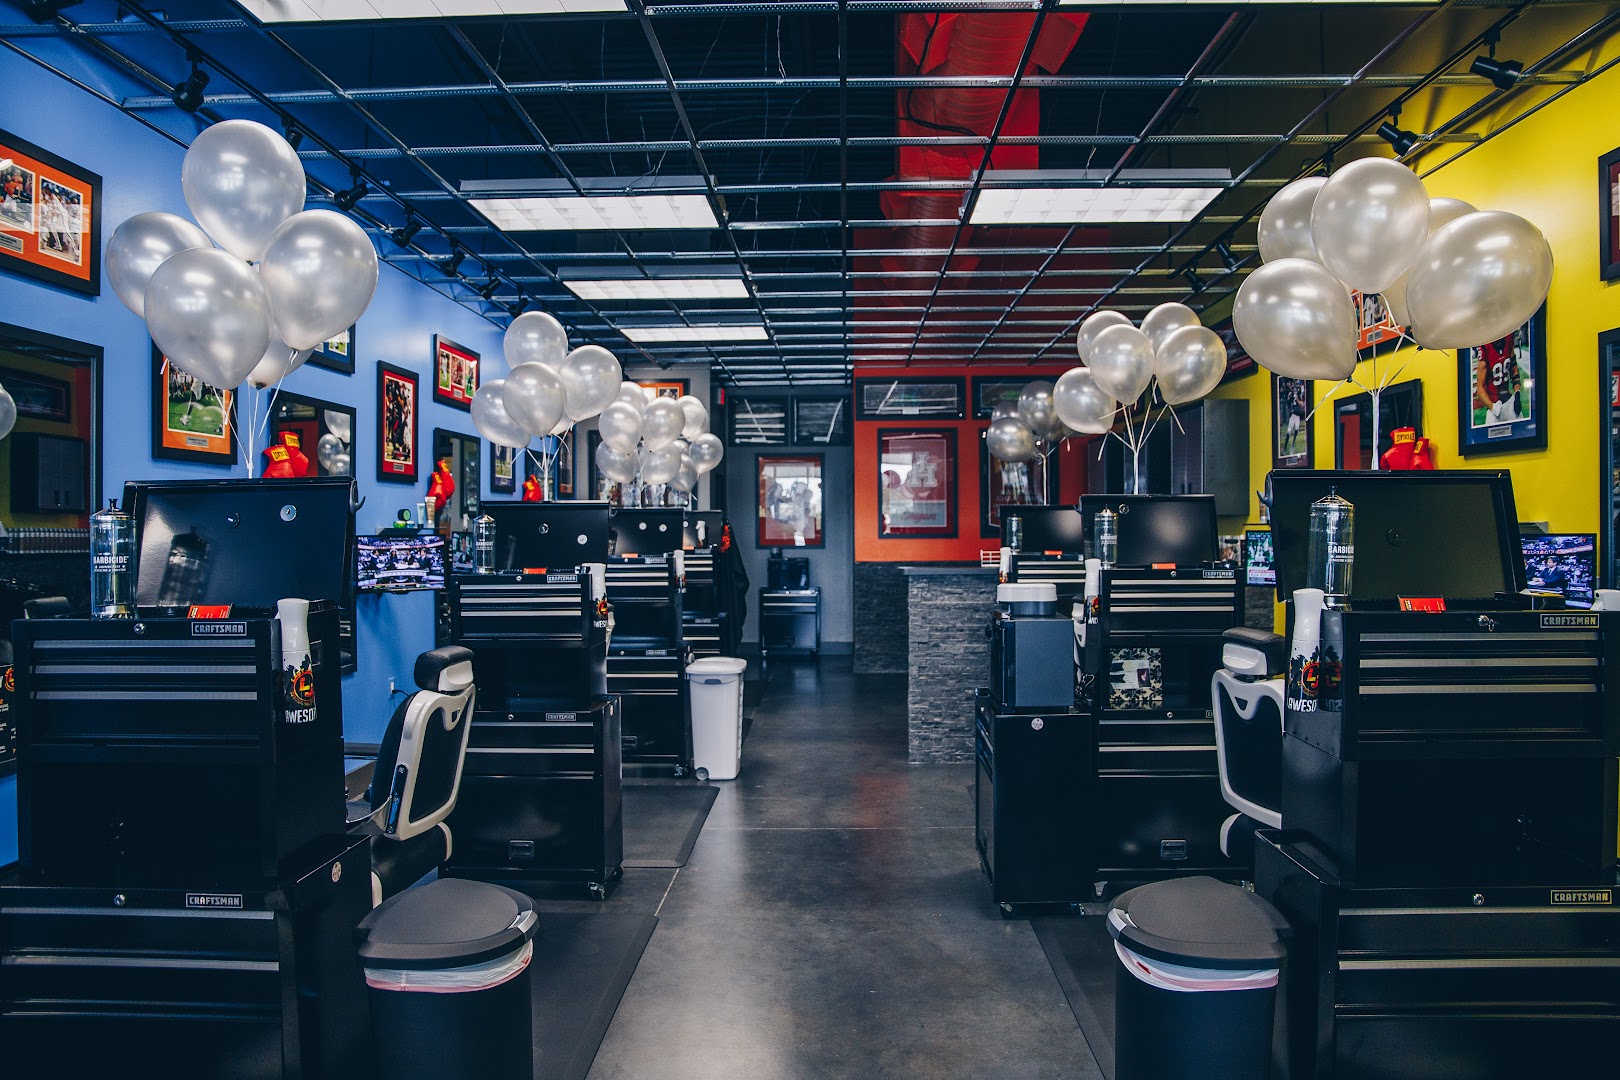 Lady Jane's Haircuts for Men (Ann Arbor Rd & Haggerty Rd)